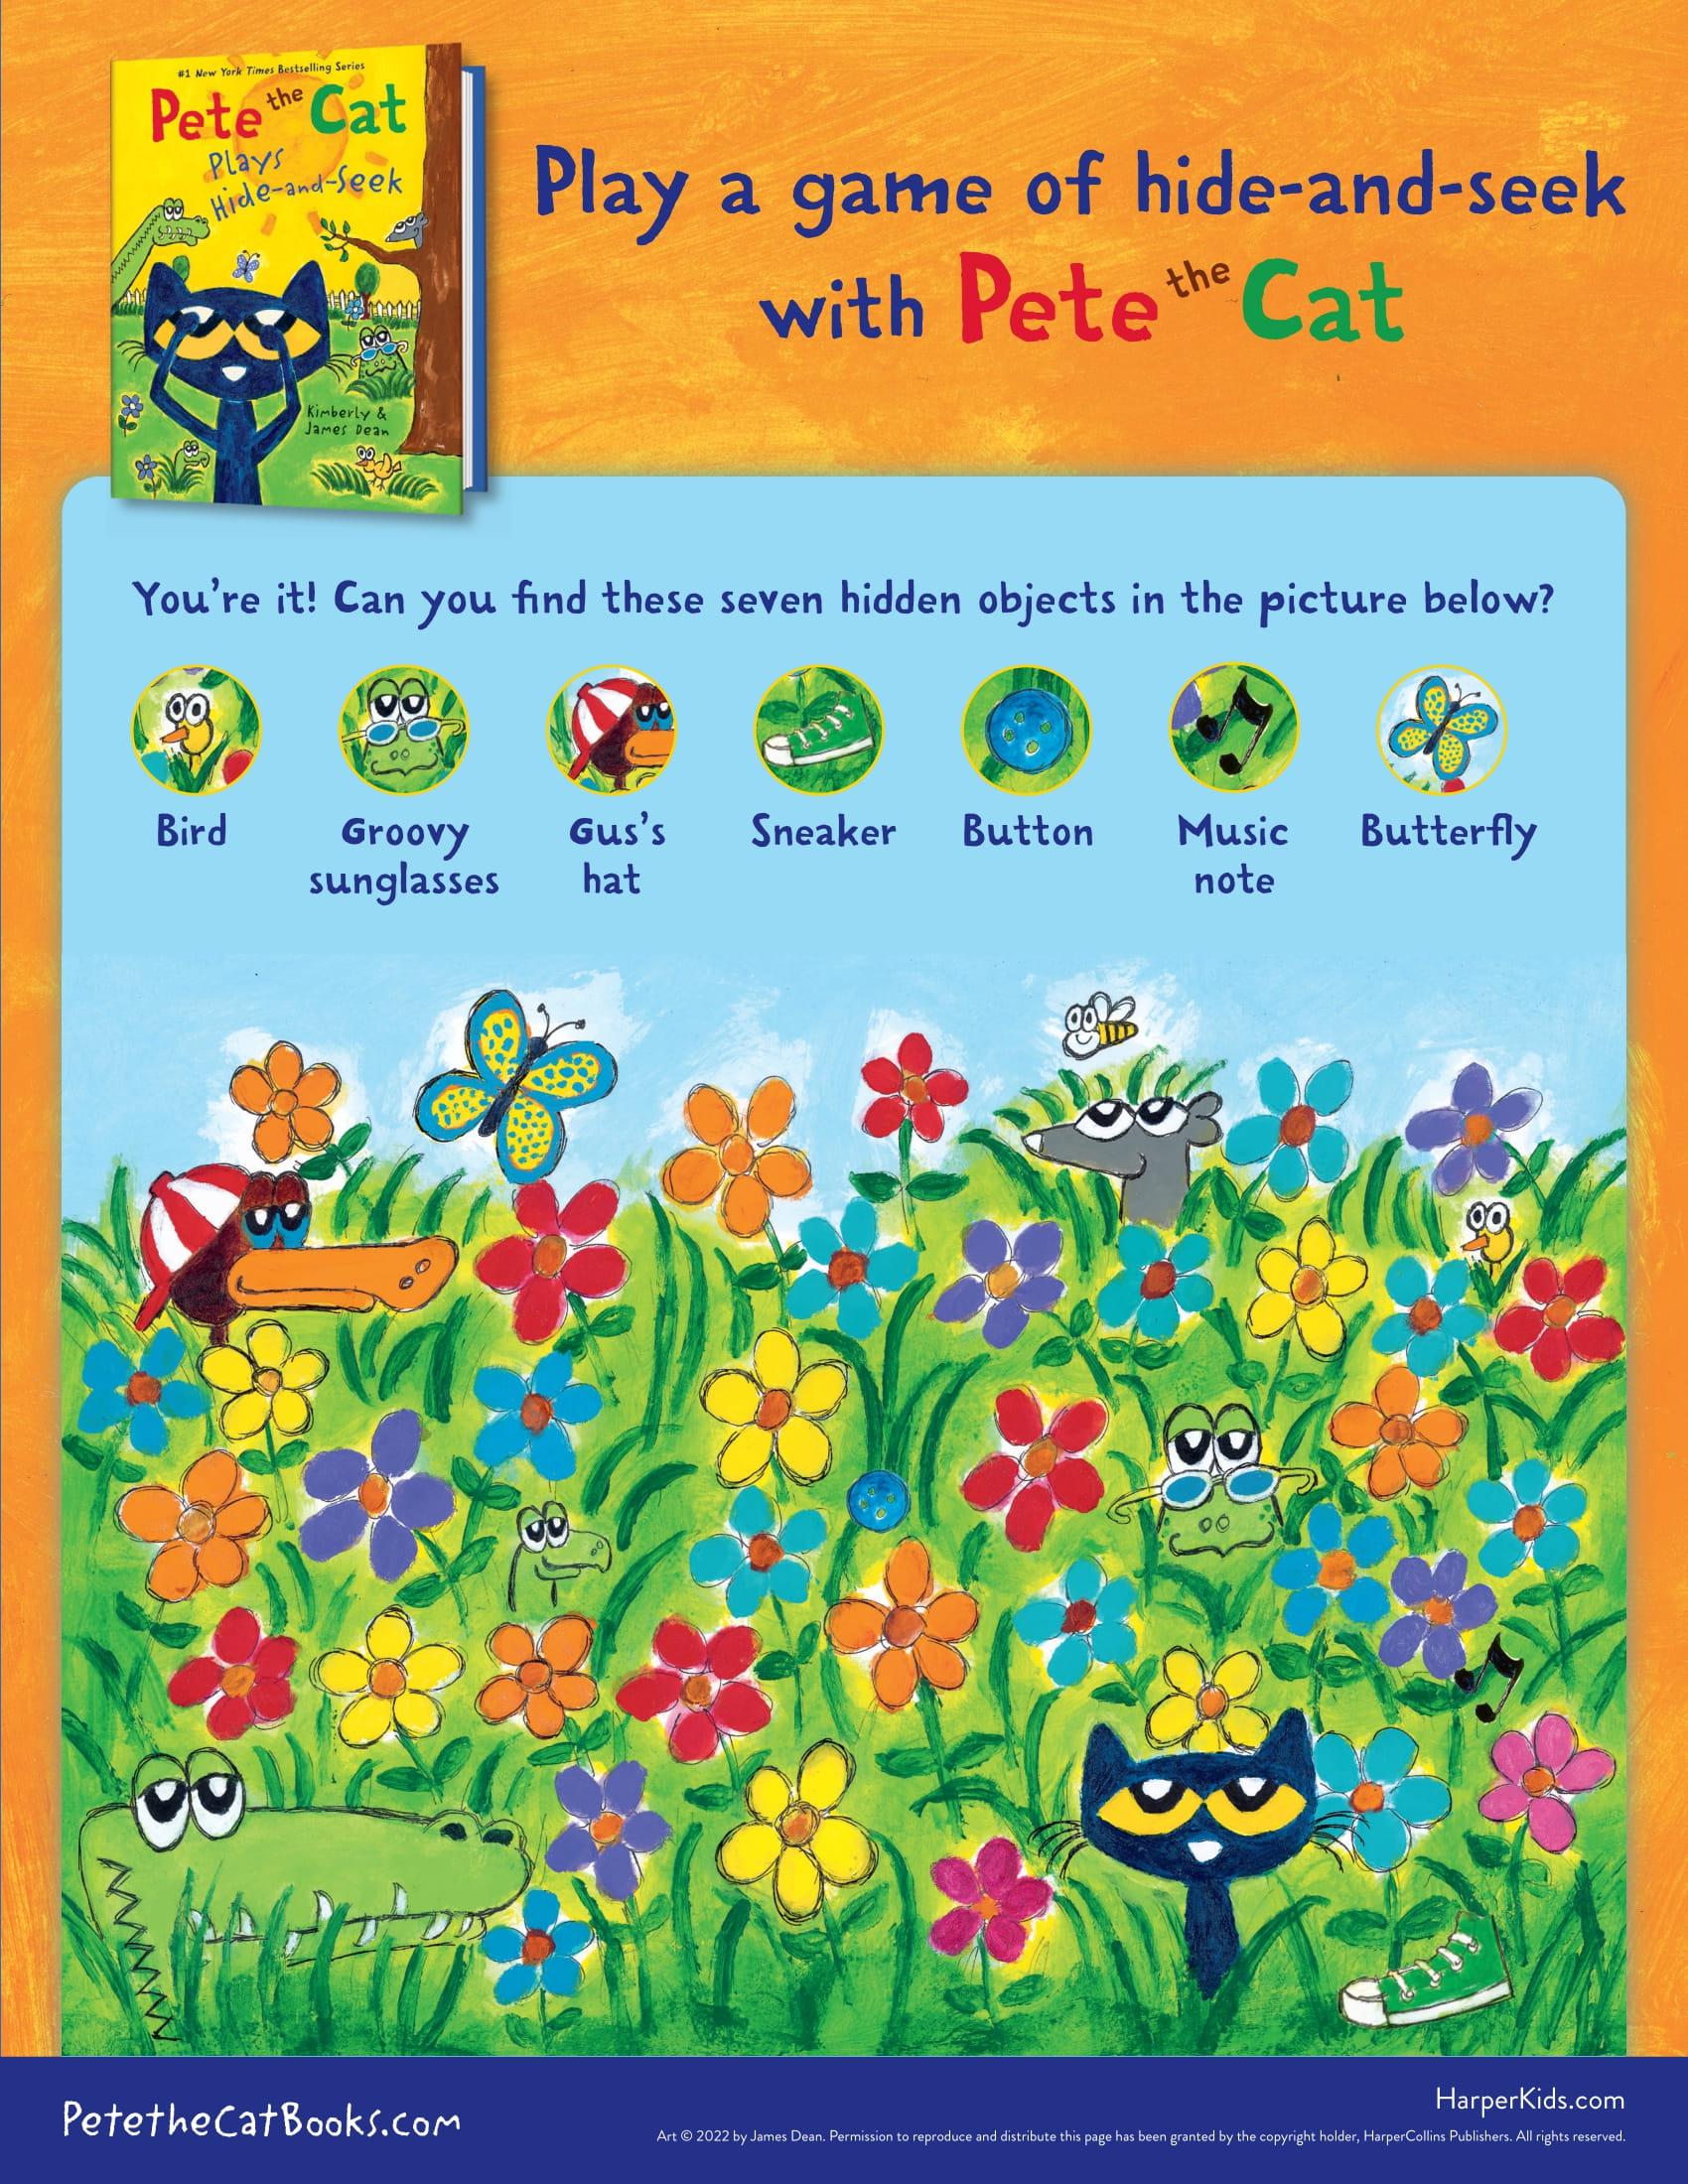 Play Hide-and-Seek with Pete